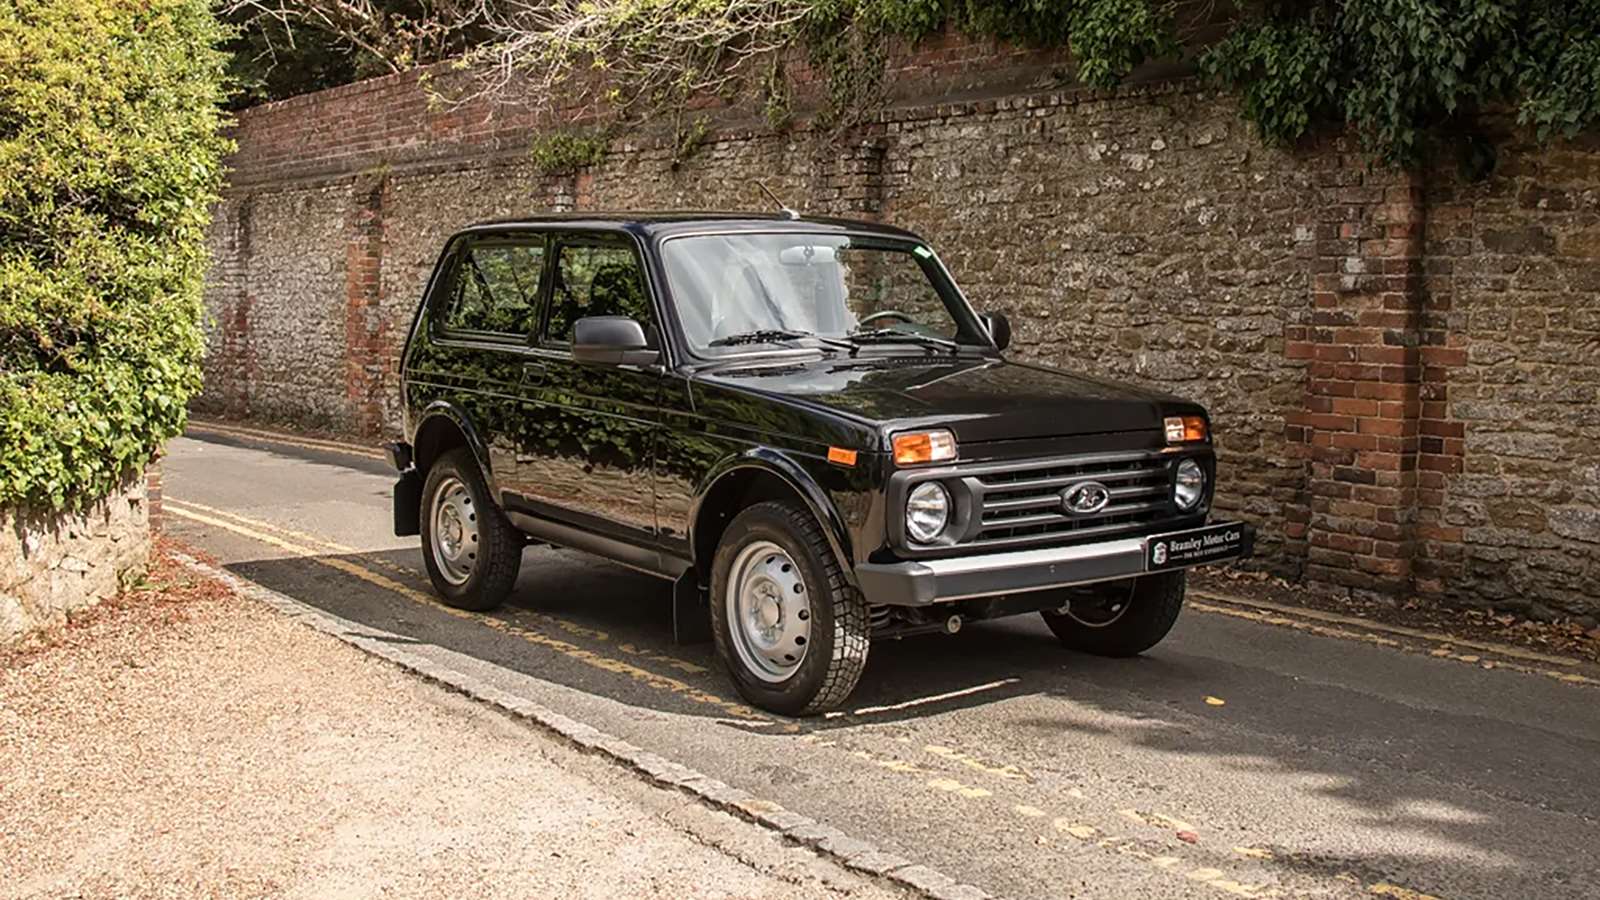 This brand-new Lada Niva is up for sale alongside Ferraris and Porsches